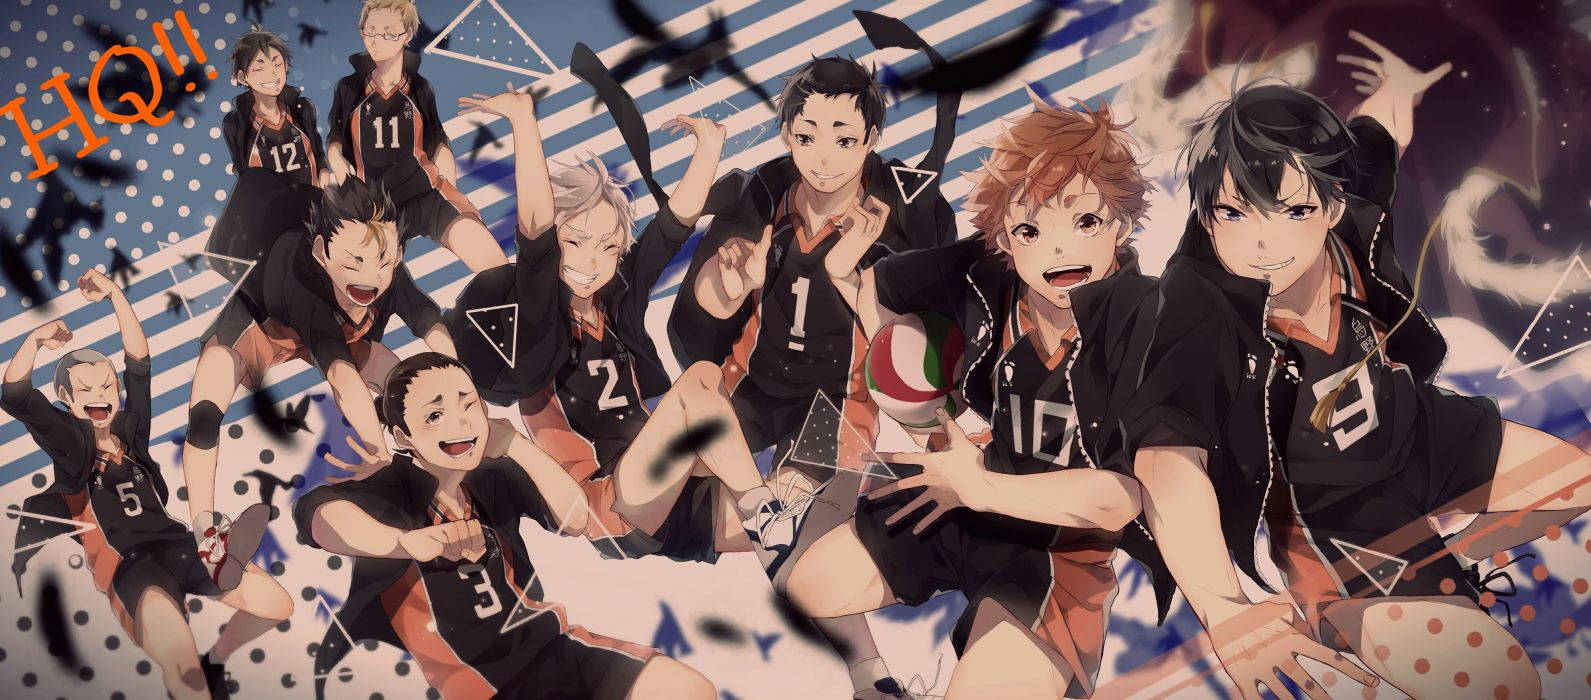 The Karasuno High Volleyball Team Has Their Sights Set On The Top!